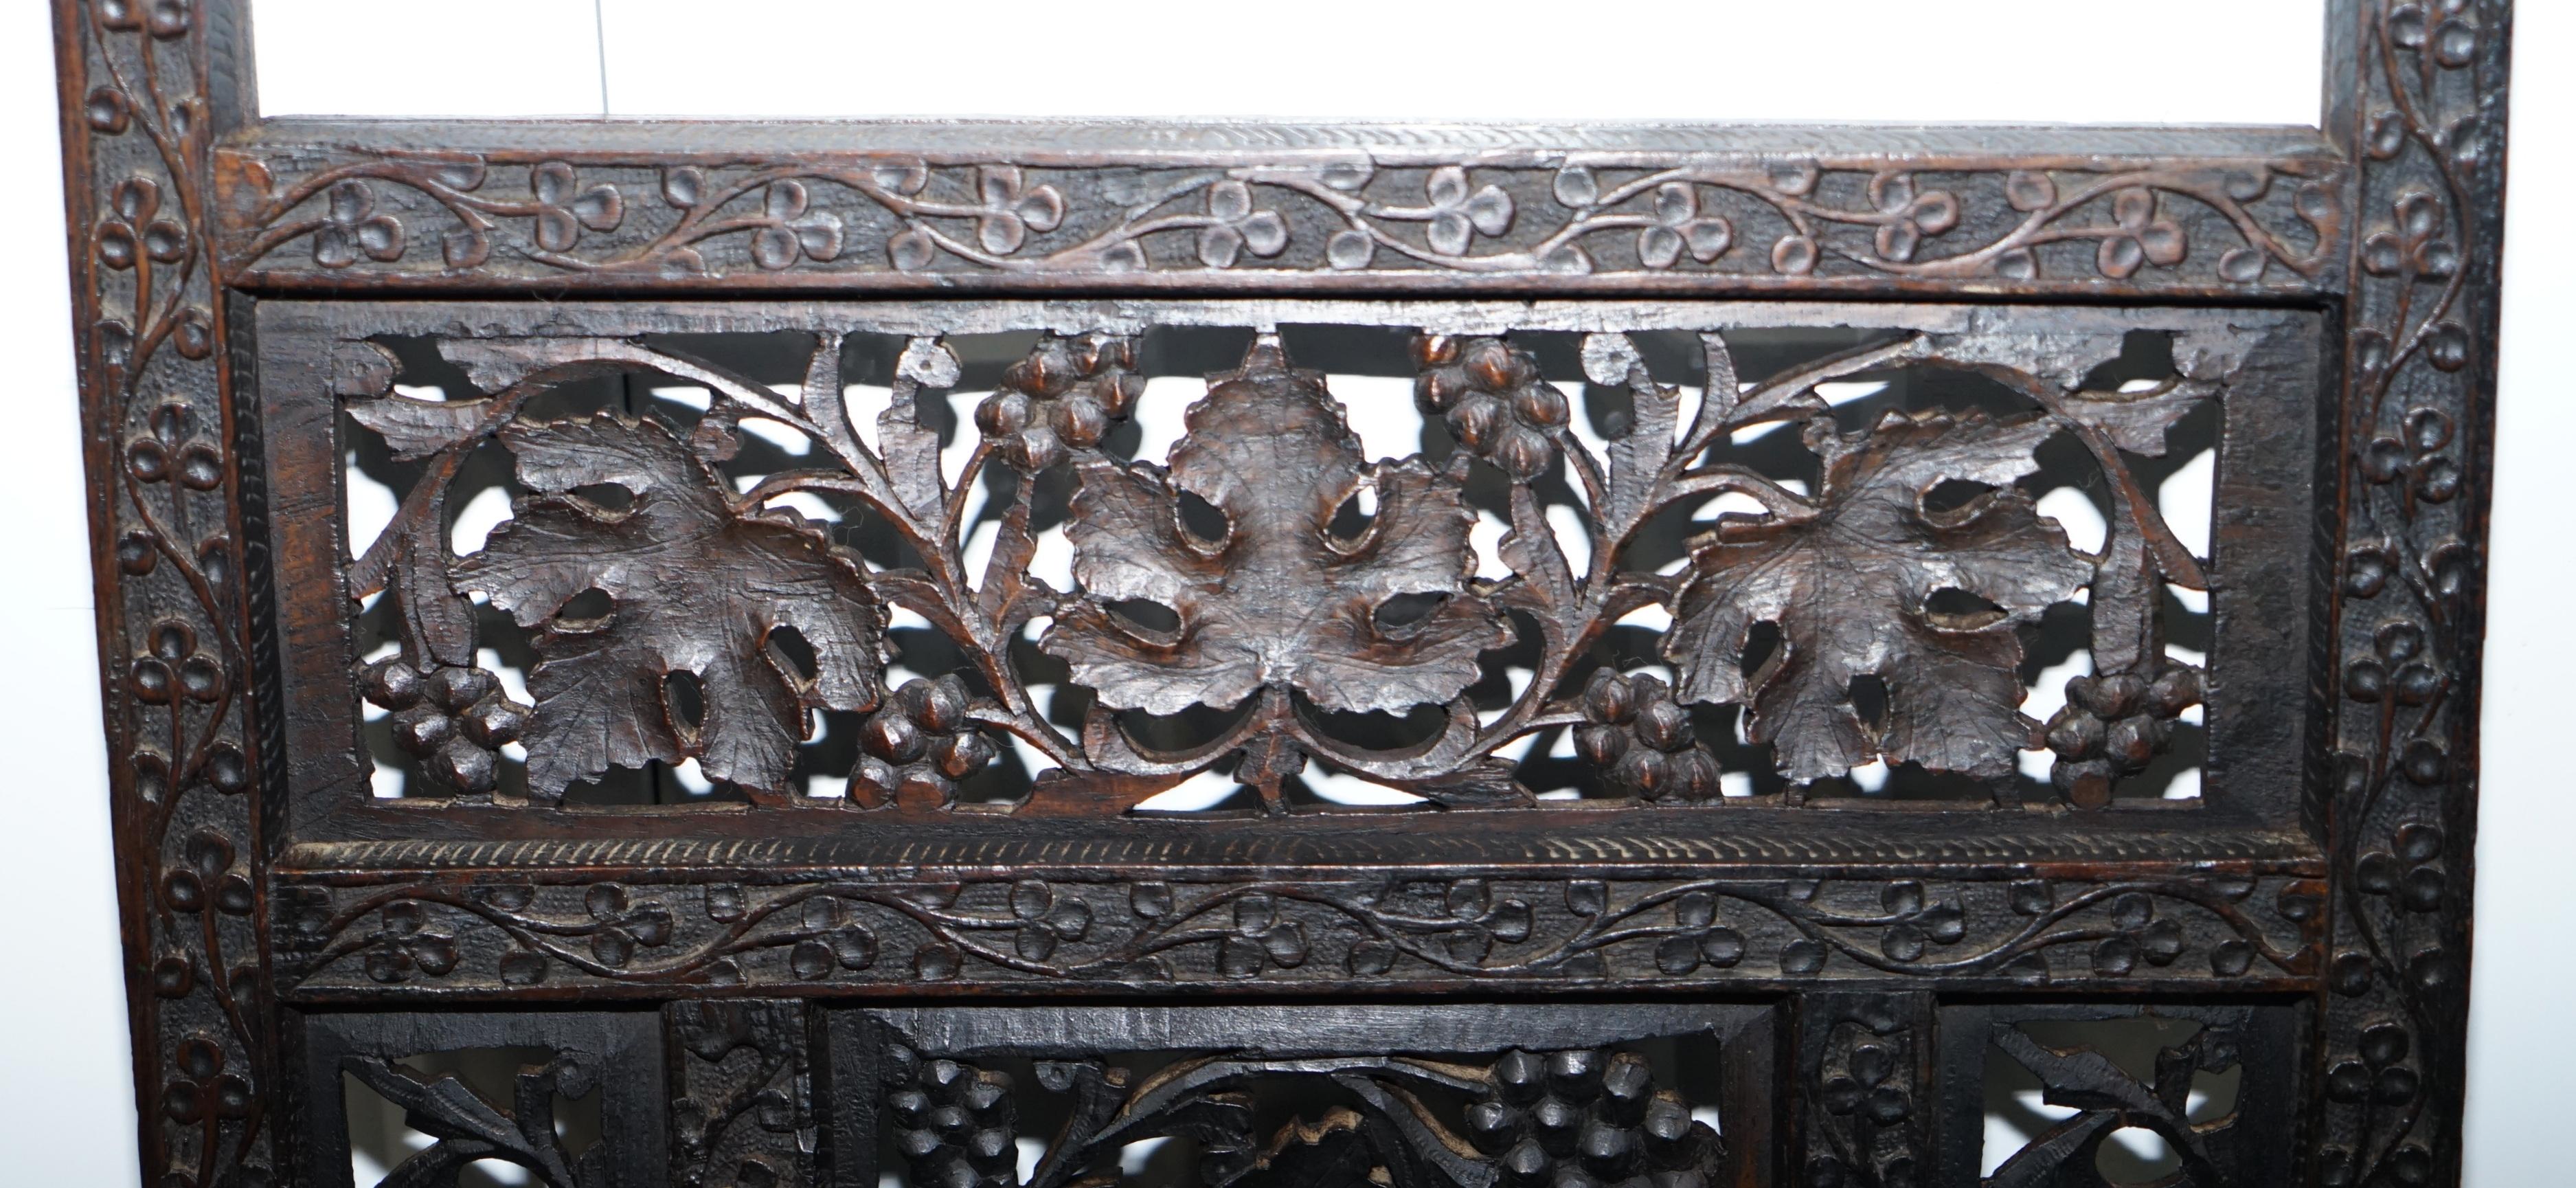 Rare Chinese Fretwork Carved Wall Panels Depicting Leaves Solid Teak Art Wood 6